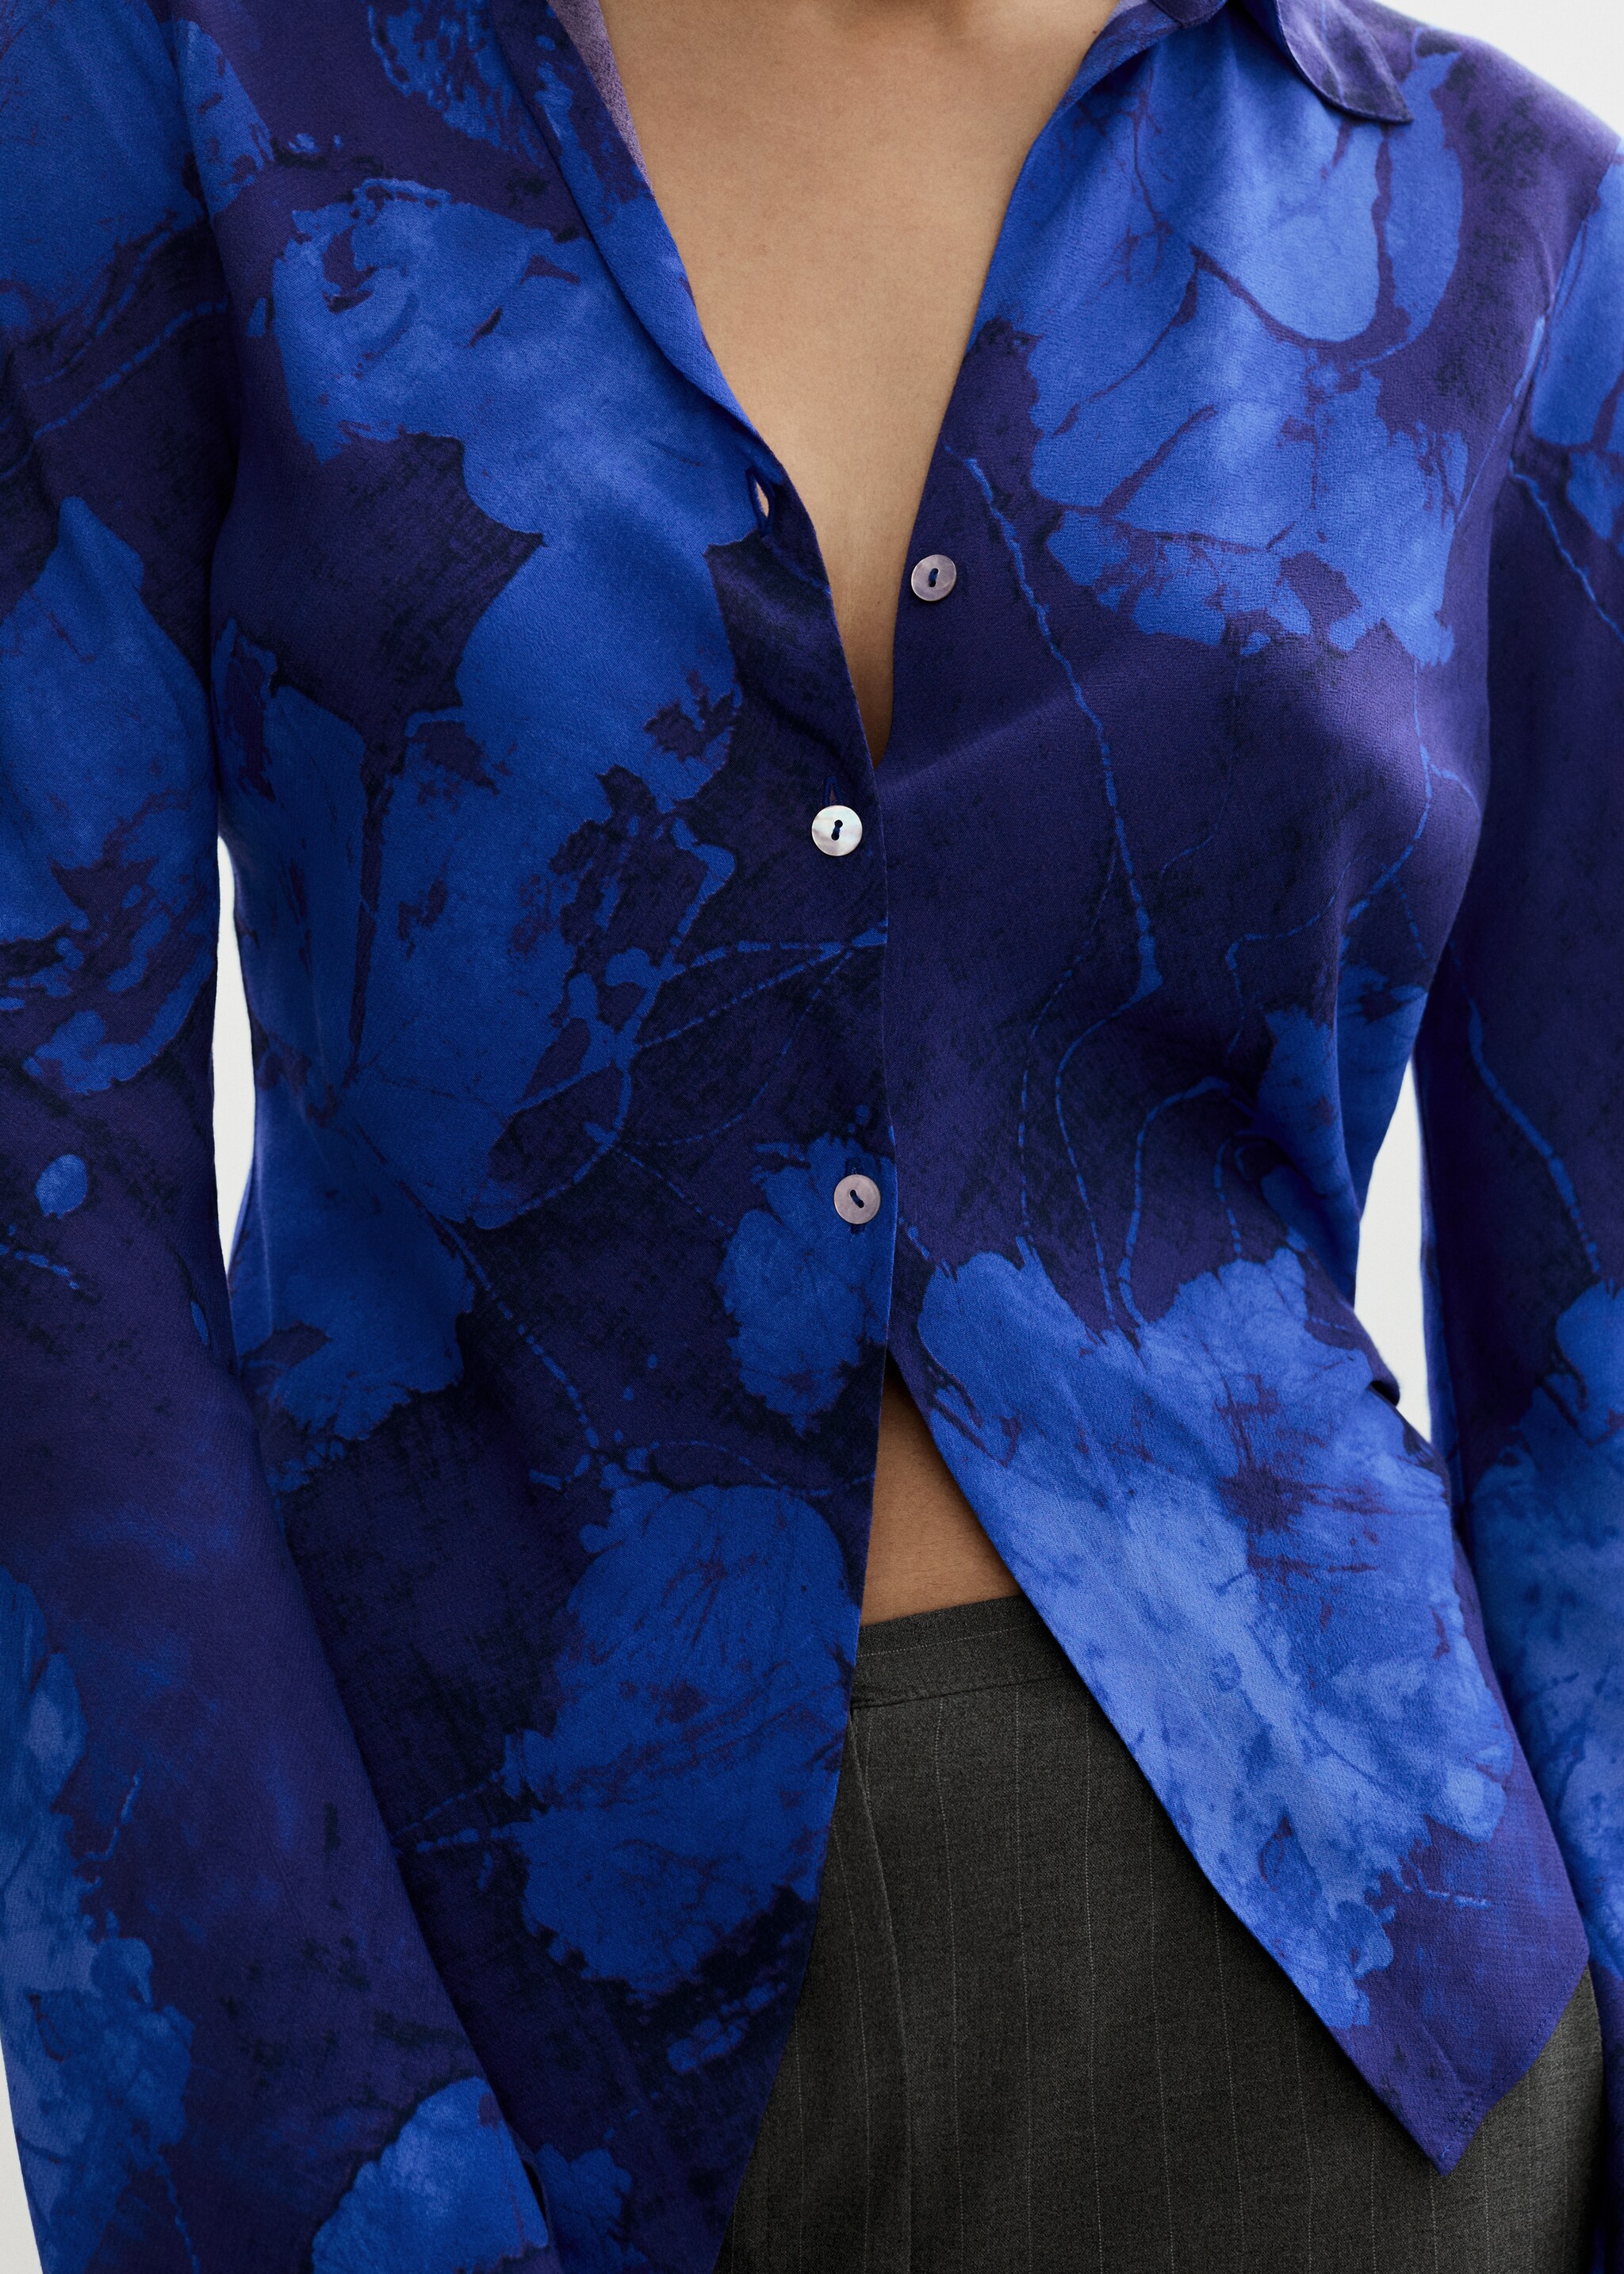 Floral print shirt - Details of the article 6